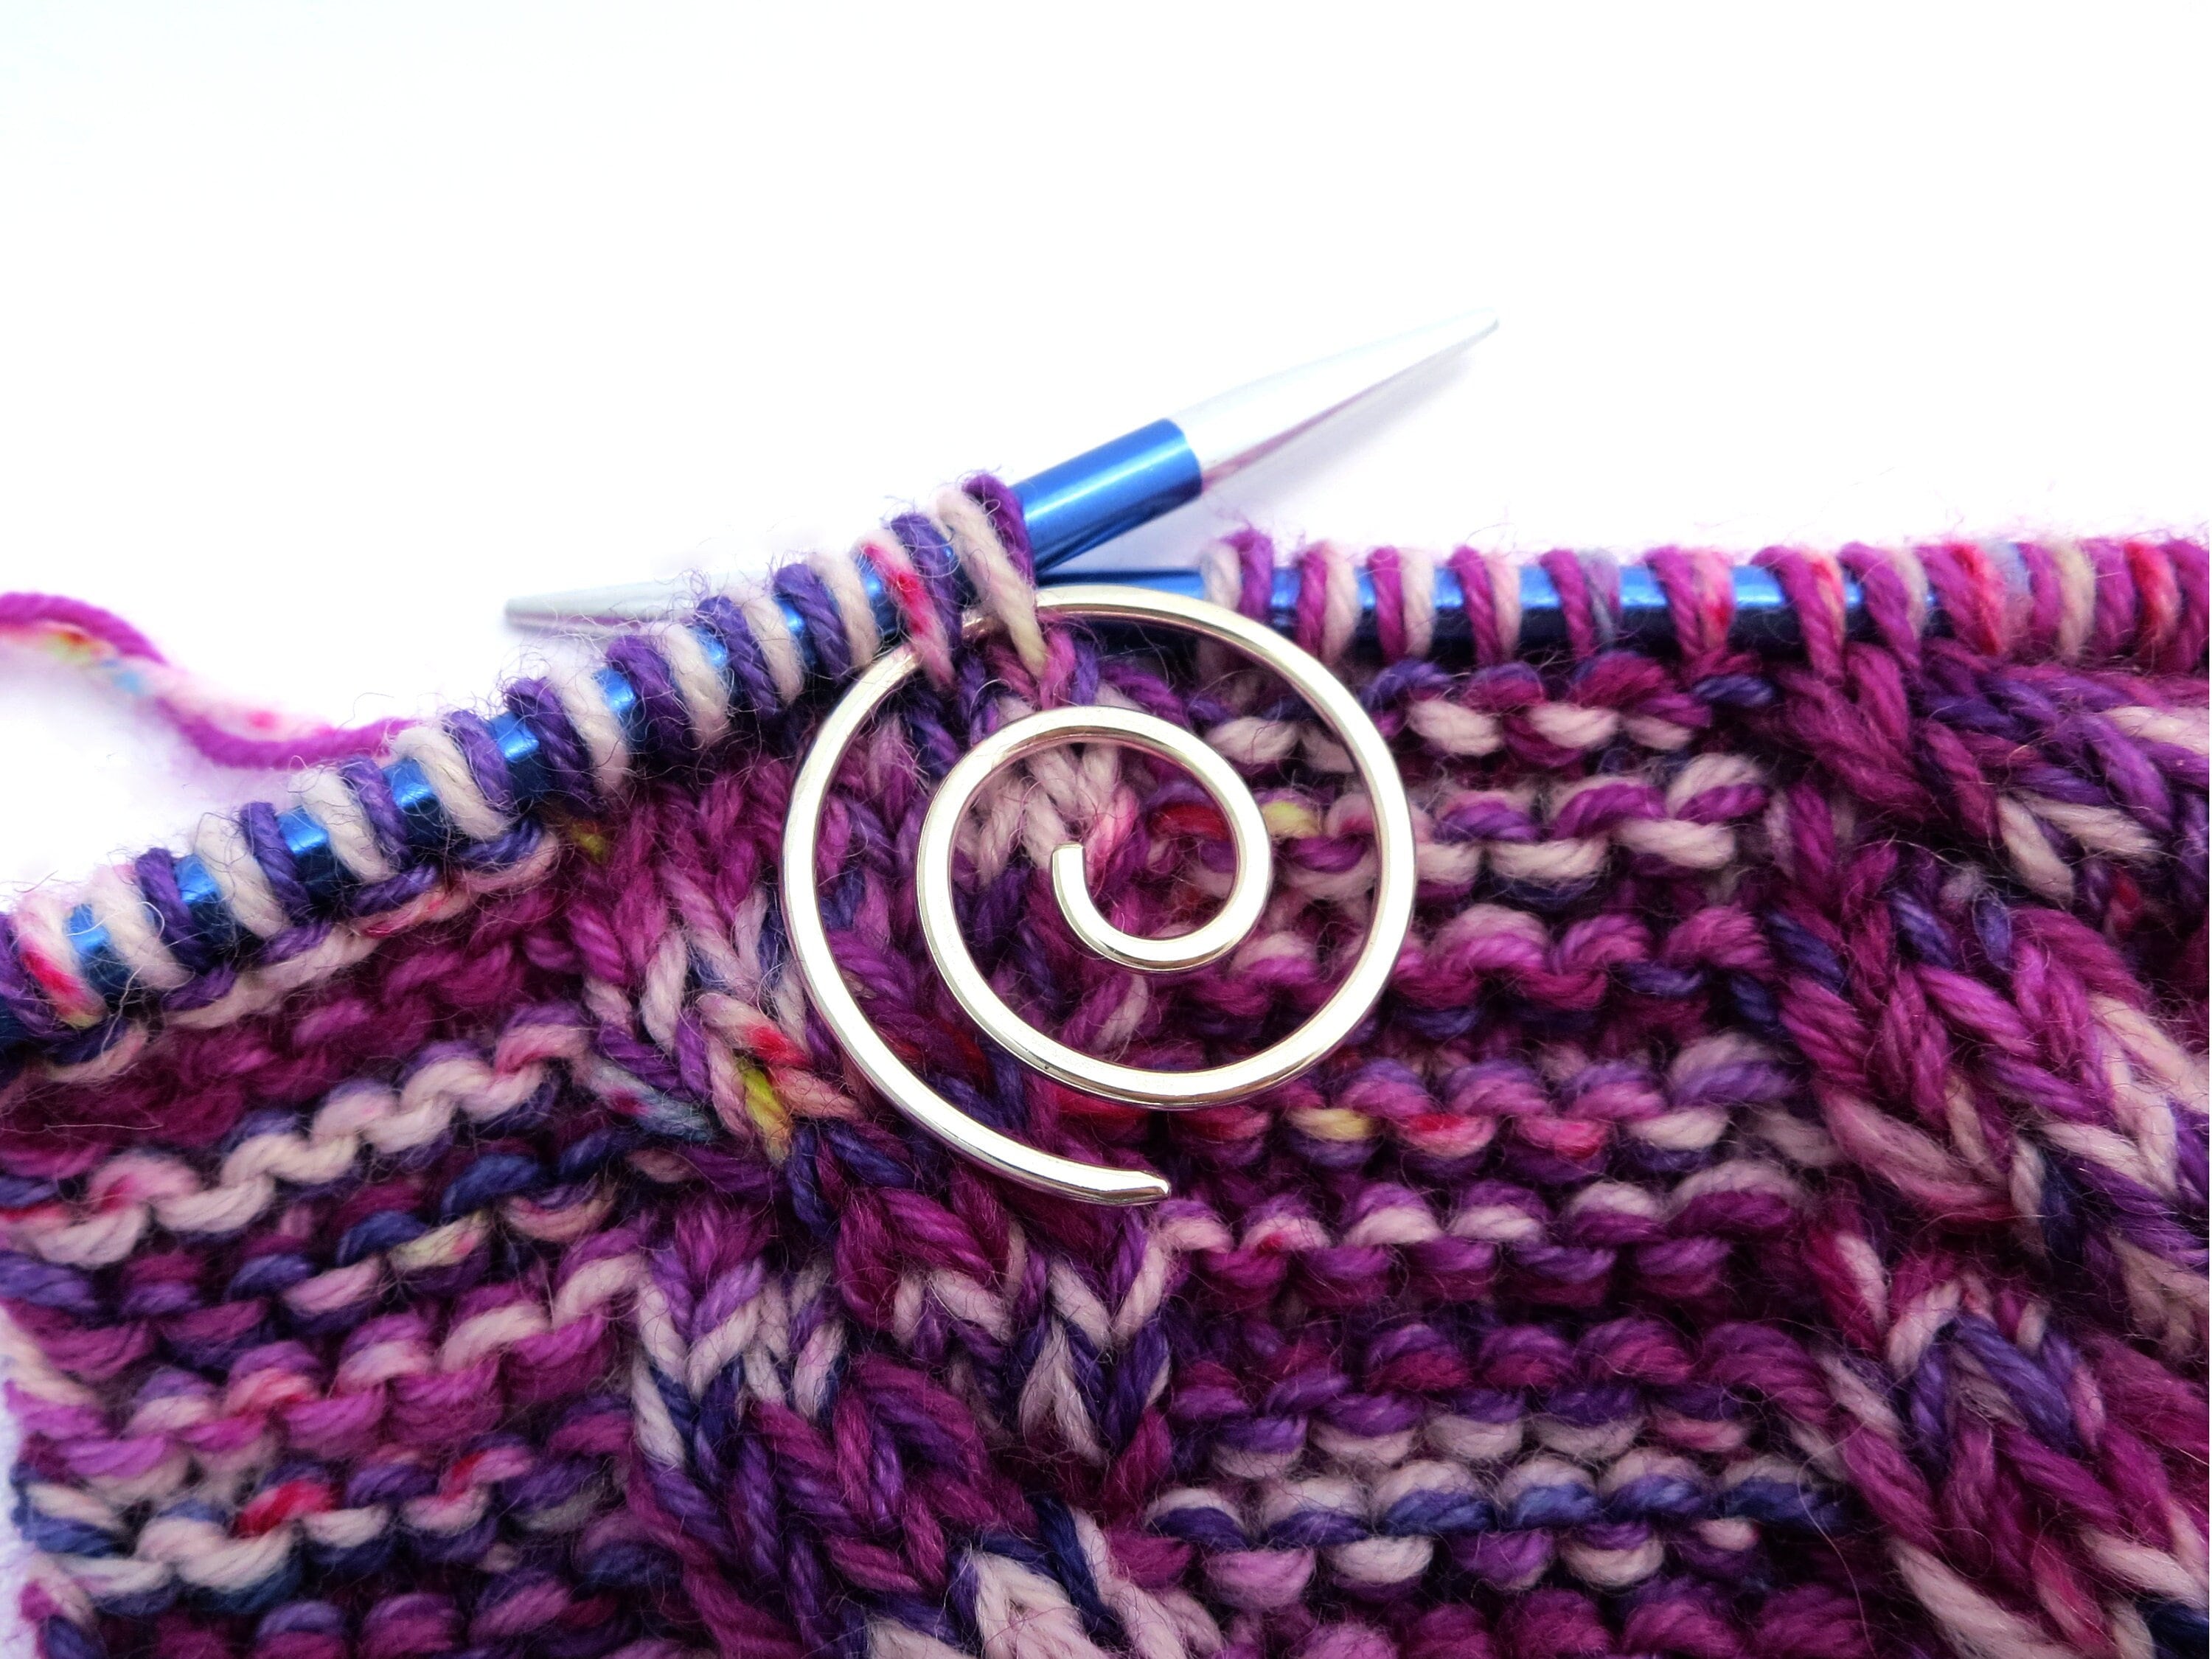 The Quilted Bear Cable Stitch Needle Three Bent Cable Needles for Knitting  With Smooth Stitch Holder Action & Colour-coded Rounded Edges 